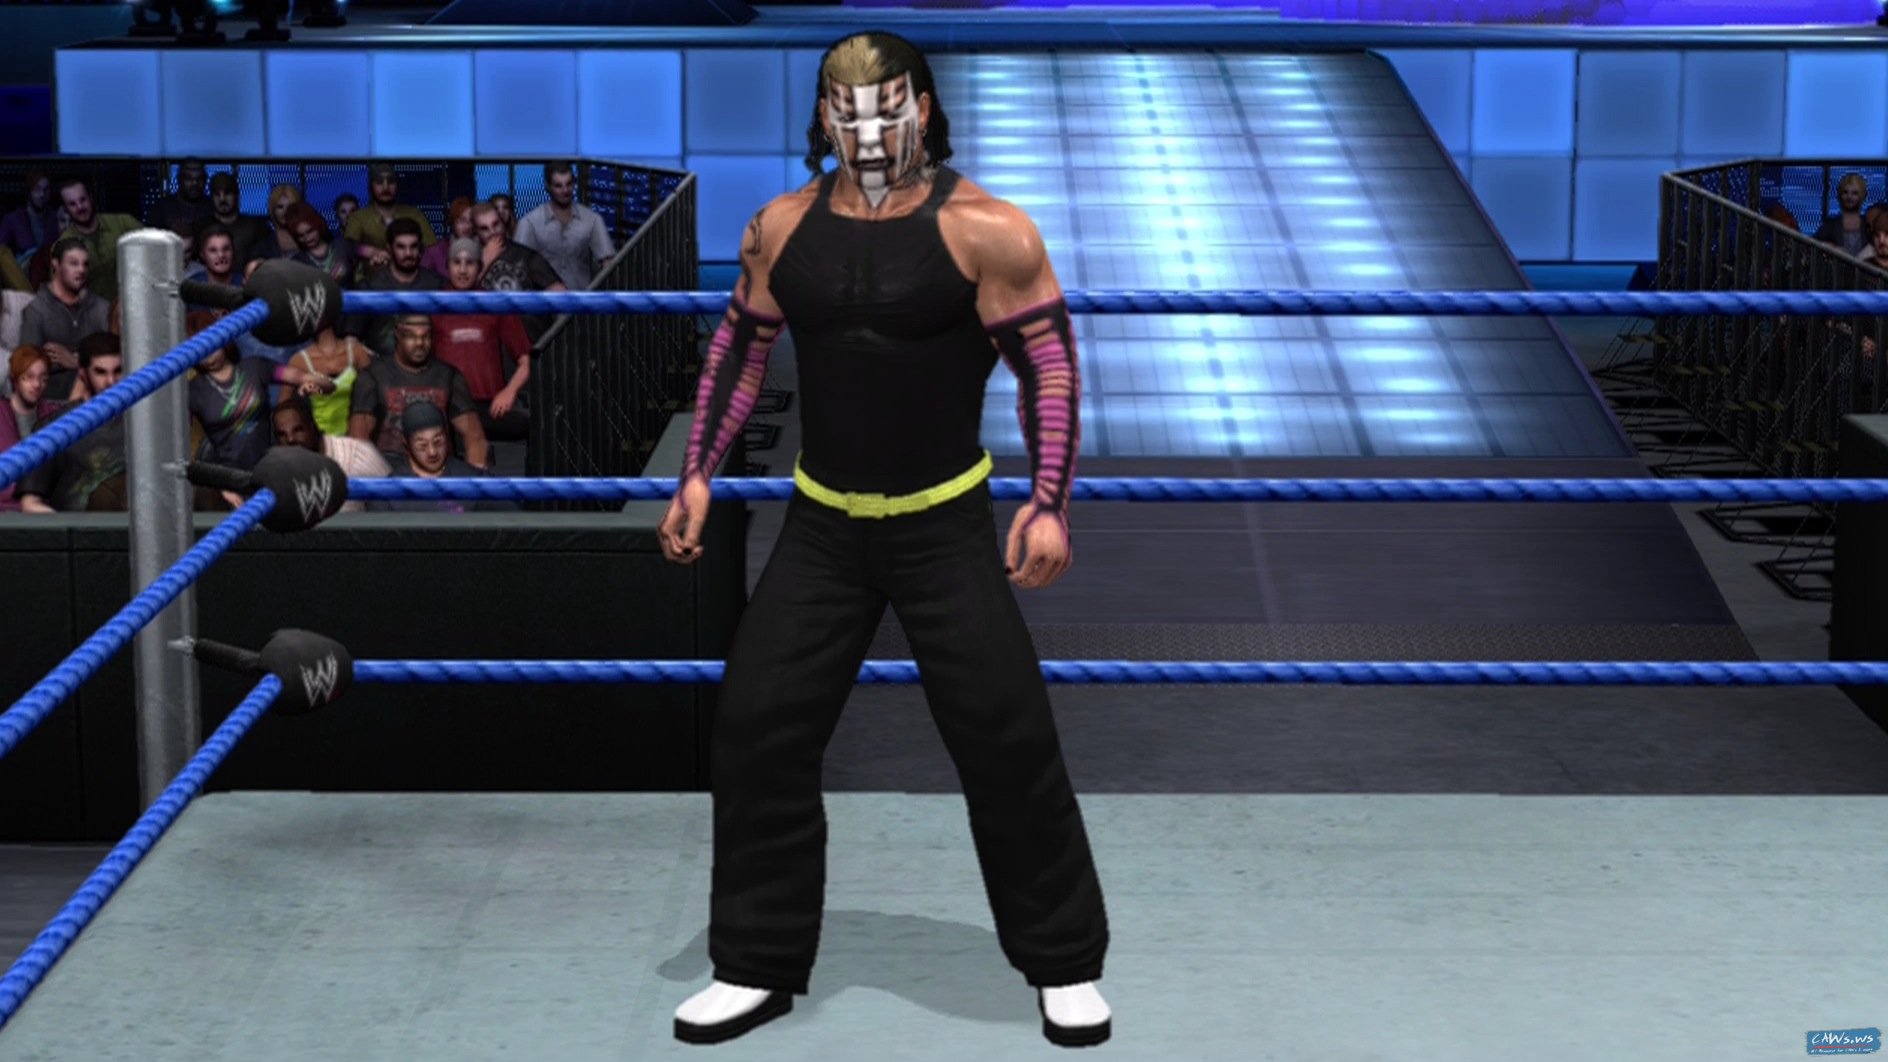 jeff4 - WWE 2k22 PPSSPP ISO file and data (Highly compressed)